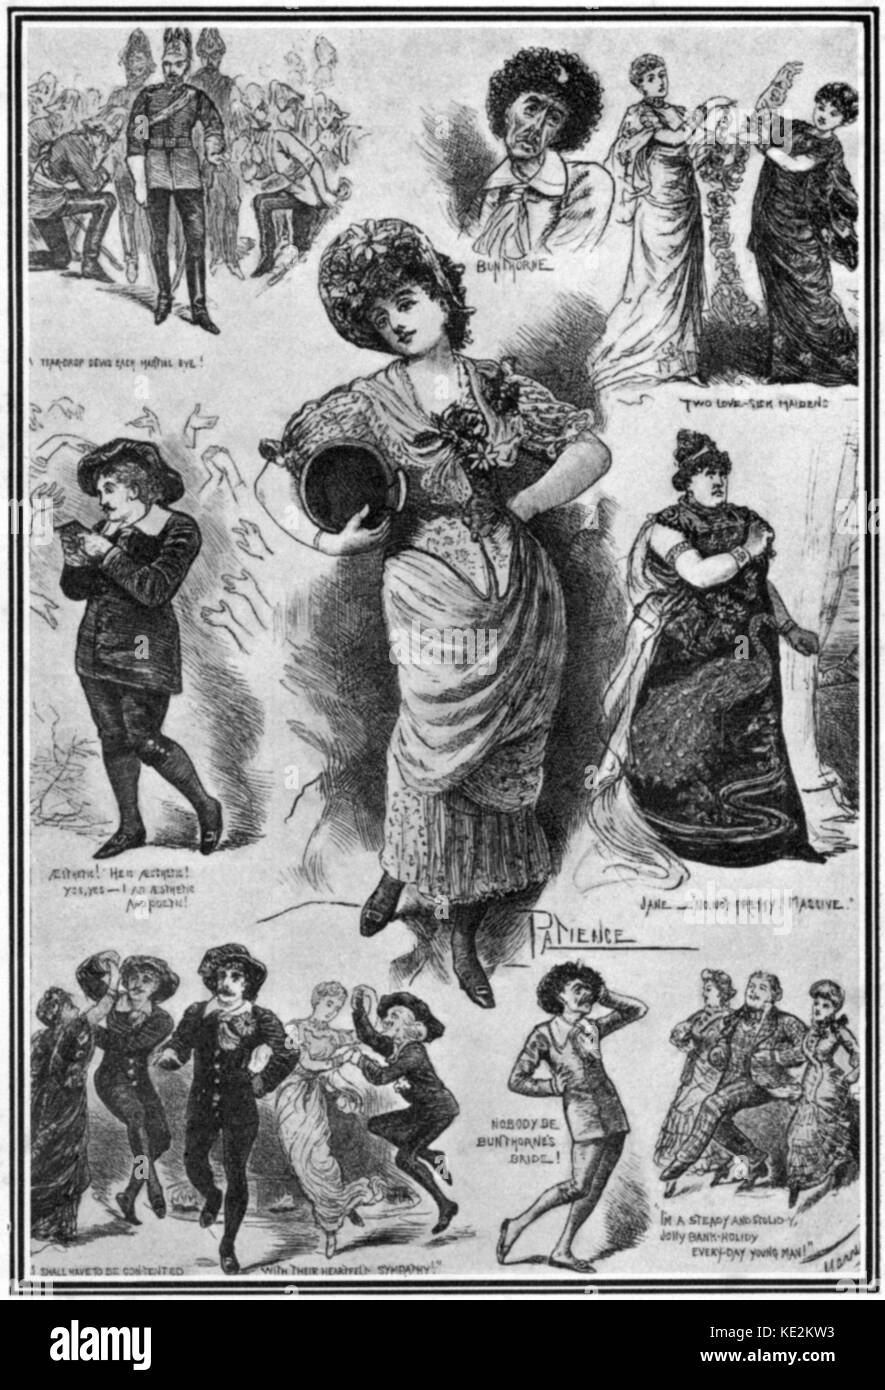 Gilbert & Sullivan 's comic operetta 'Patience'  - Premiere   23 April 1881. Drawing by Harry Furniss, showing Lady Jane, Patience, Bunthorne and others. From the 'Illustrated London News'. Librettist William S. Gilbert (1836–1911) and composer Arthur Sullivan (1842–1900). Stock Photo